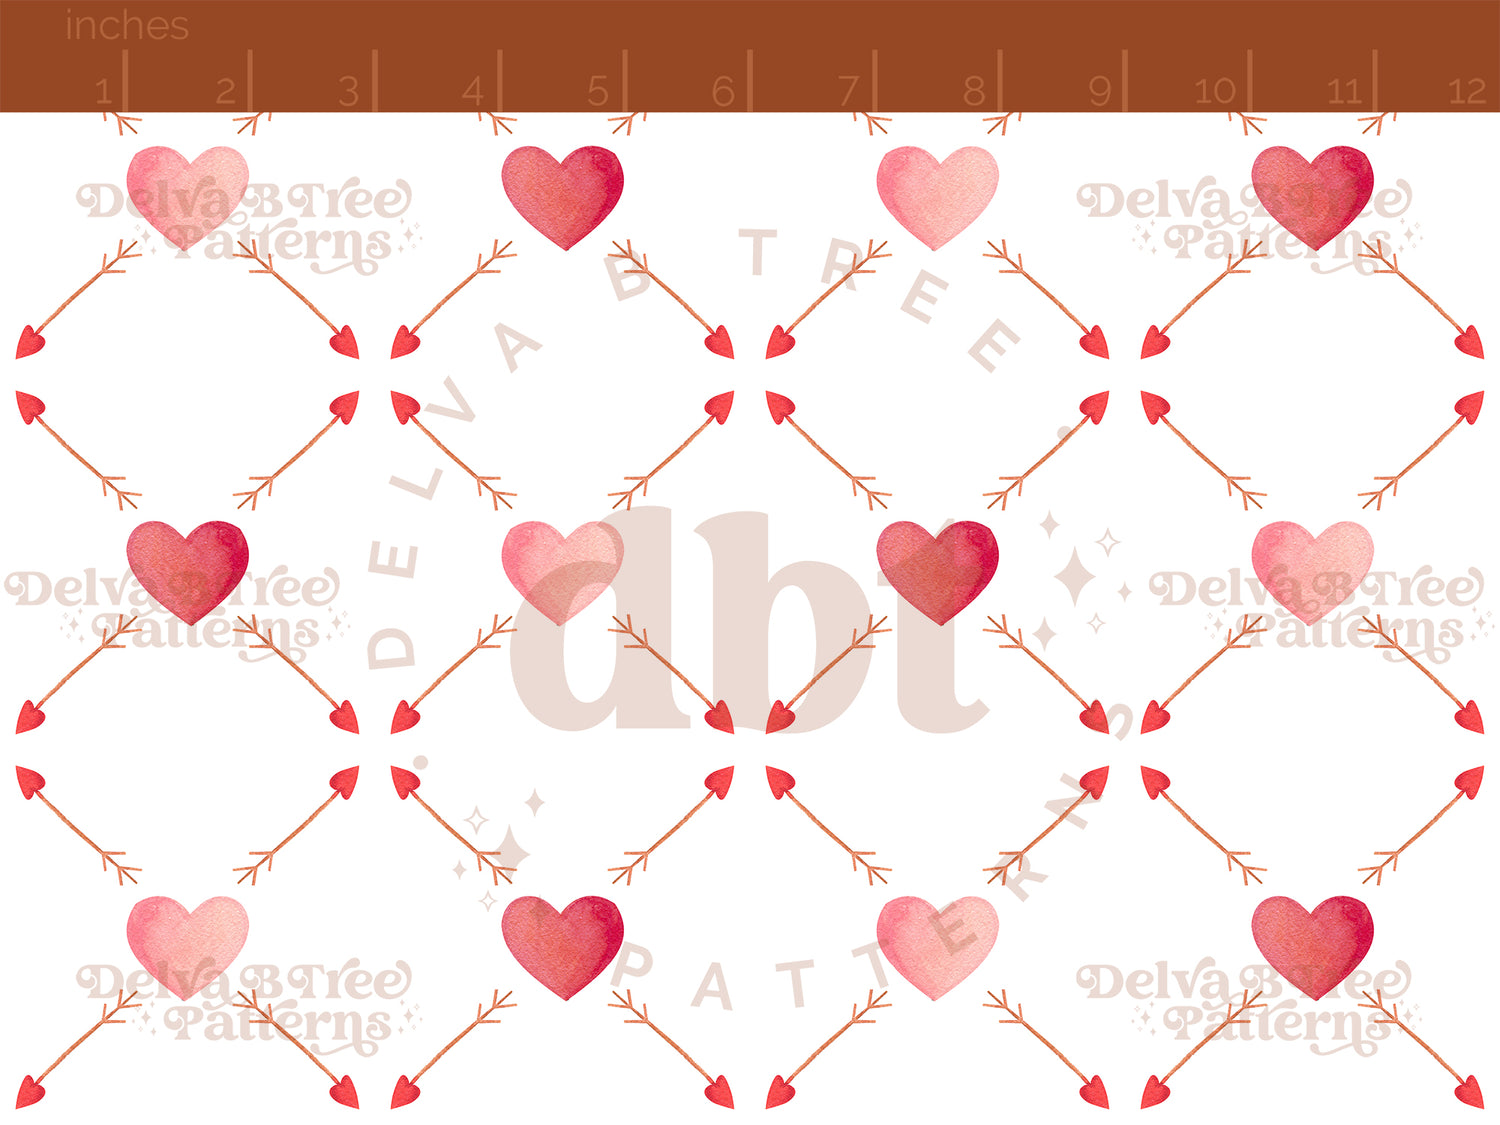 Watercolor pink hearts, red hearts and brown arrows seamless pattern scale, digital file for small shops that make handmade products in small batches.